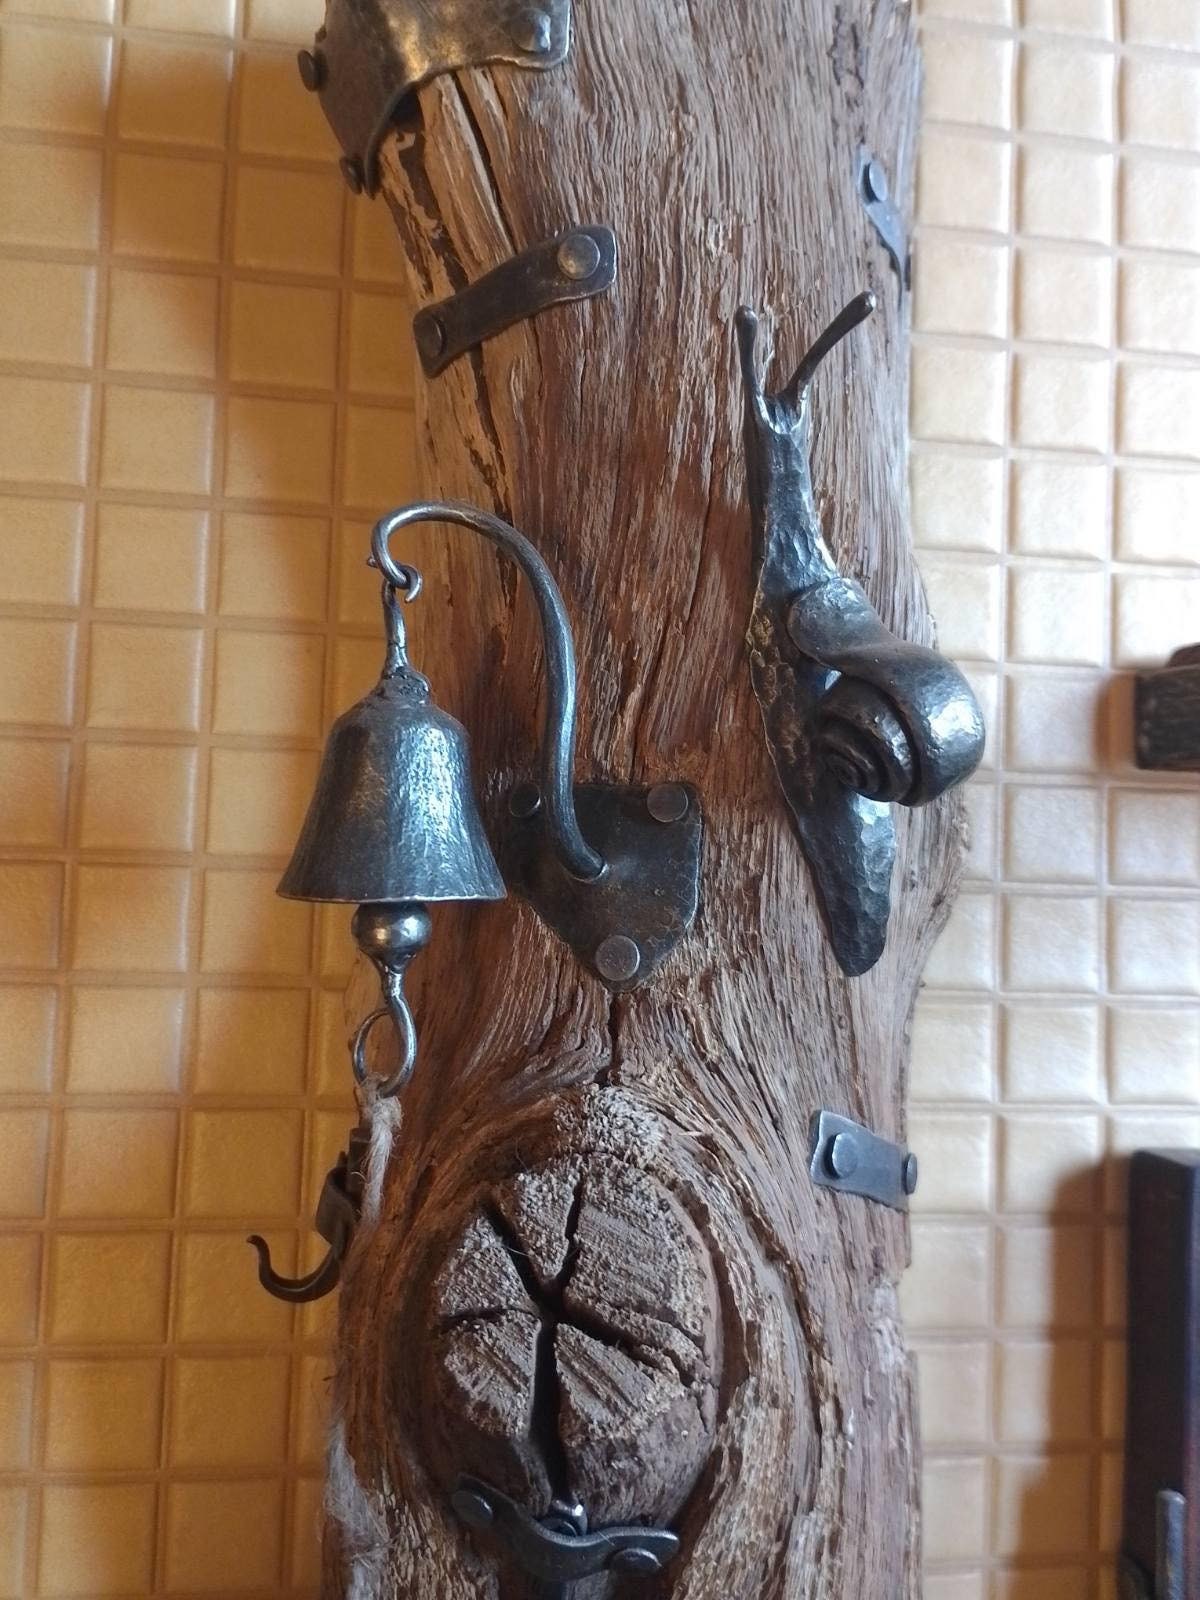 Hooks, bell, snail, medieval, forest, trunk, nature, birthday, anniversary, Christmas, 5th anniversary, wooden gift, forgedcommodities